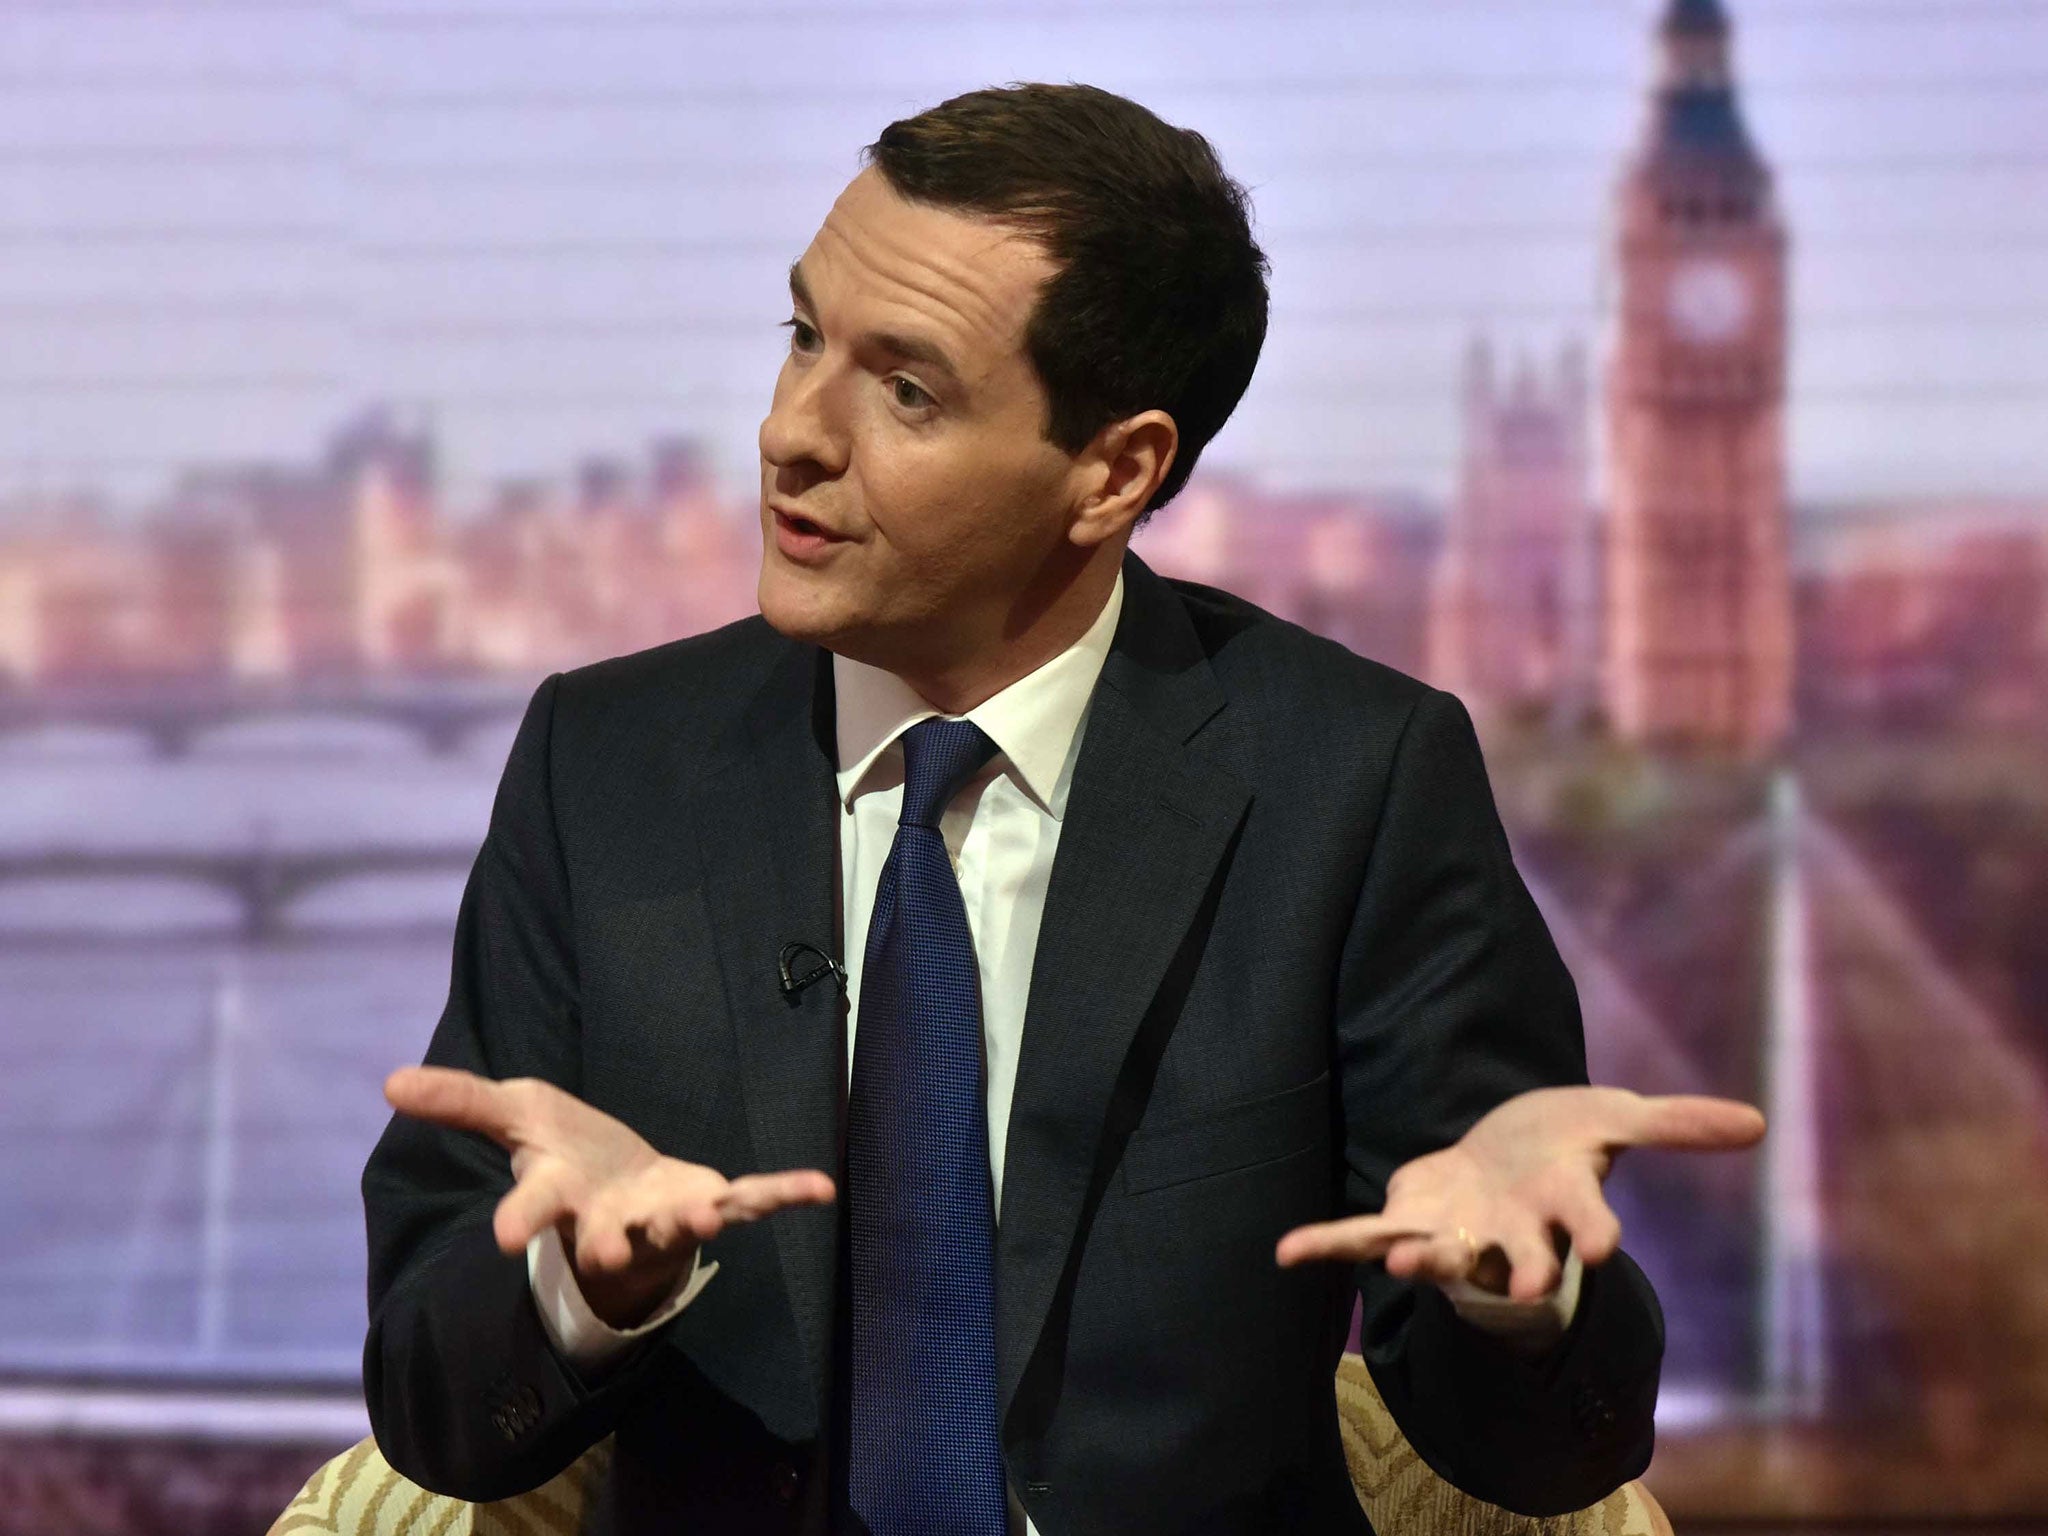 George Osborne appearing on the BBC's Andrew Marr Show on Sunday, 5 July 2015